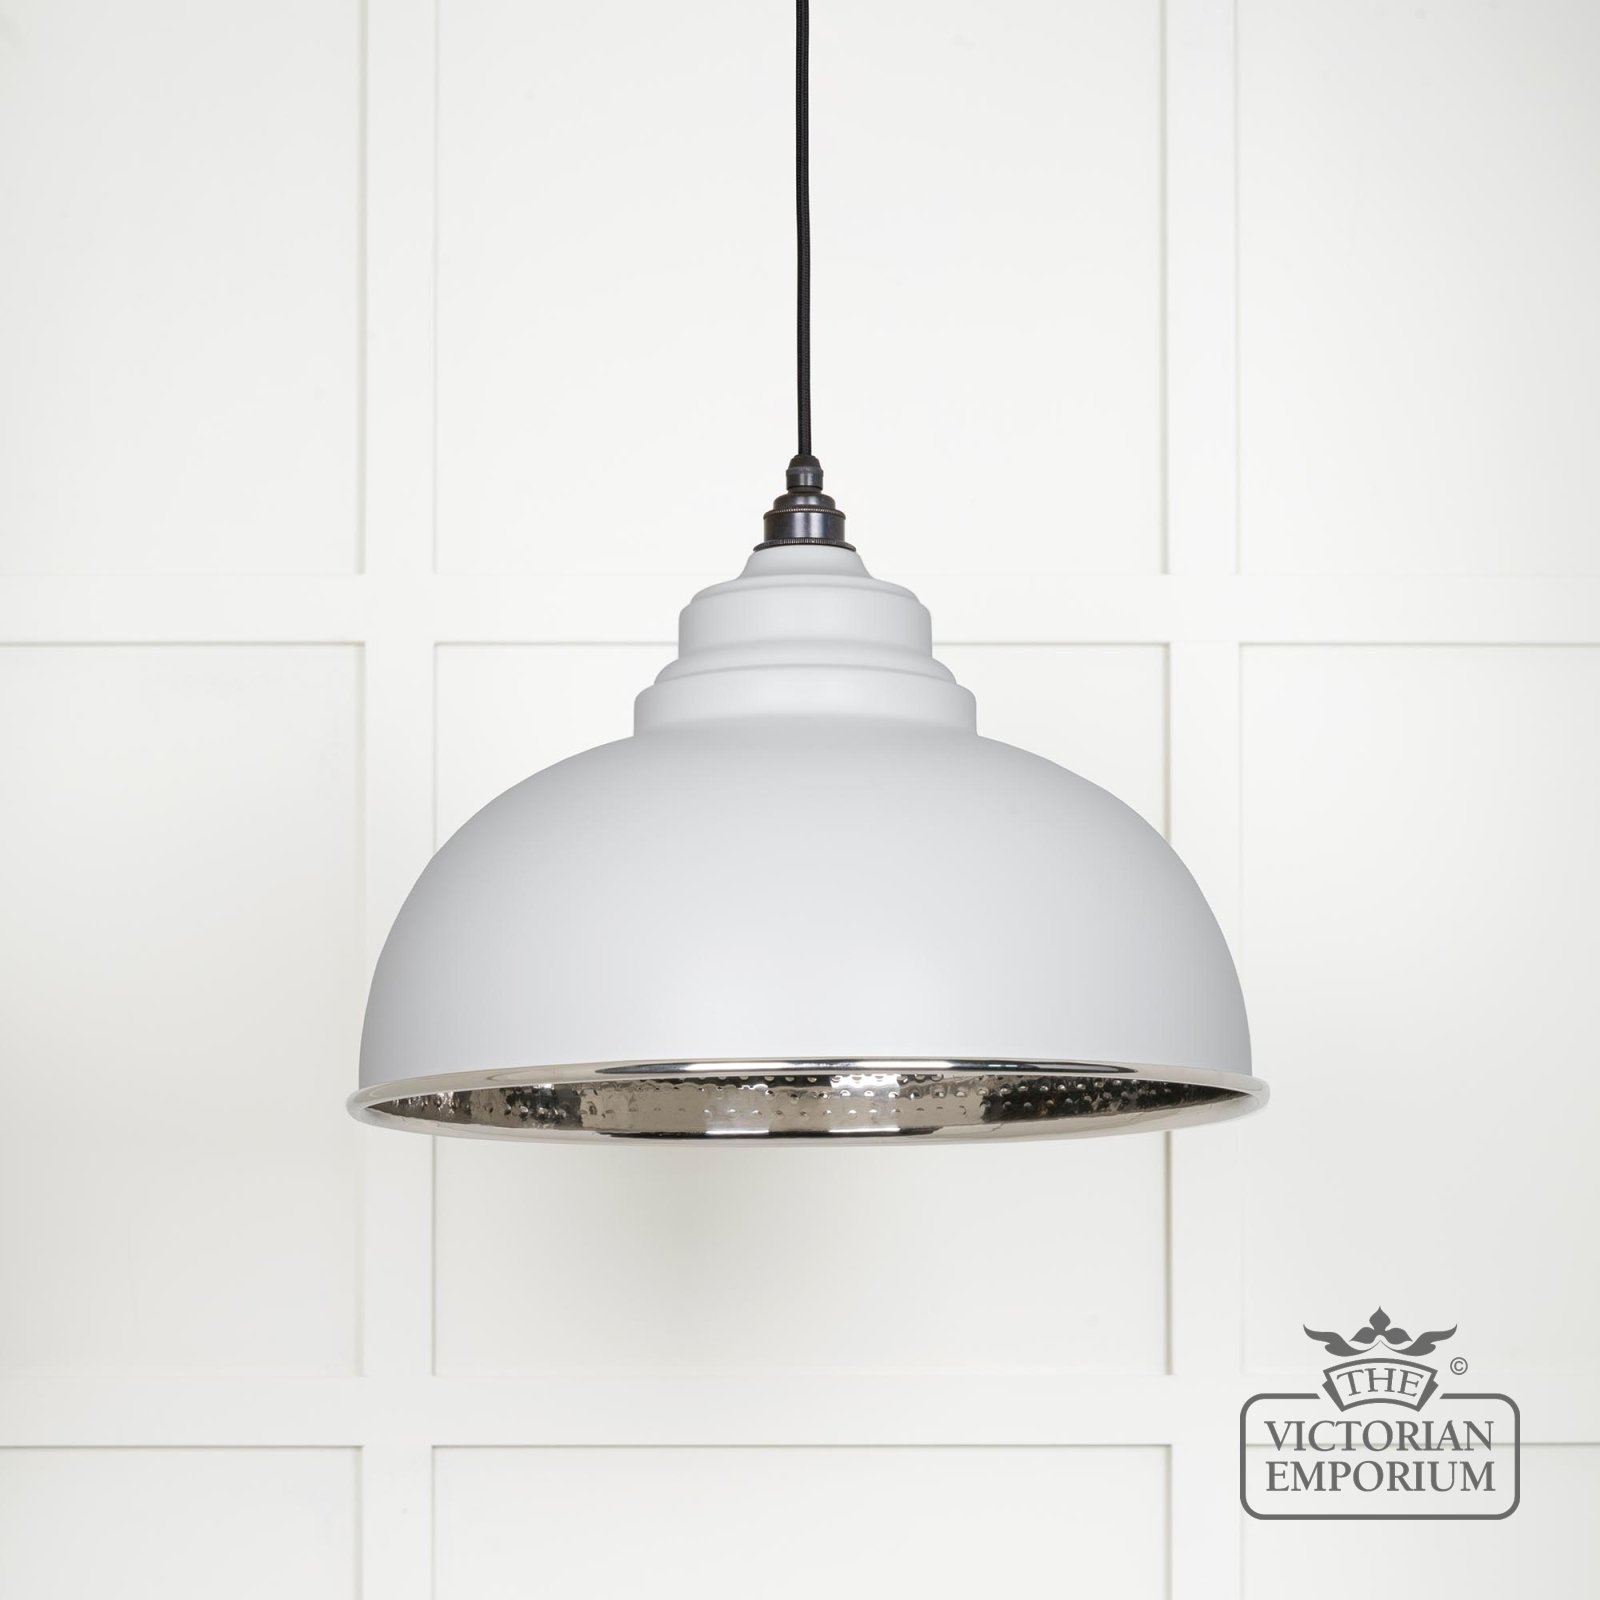 Harlow pendant light in hammered nickel with flock exterior